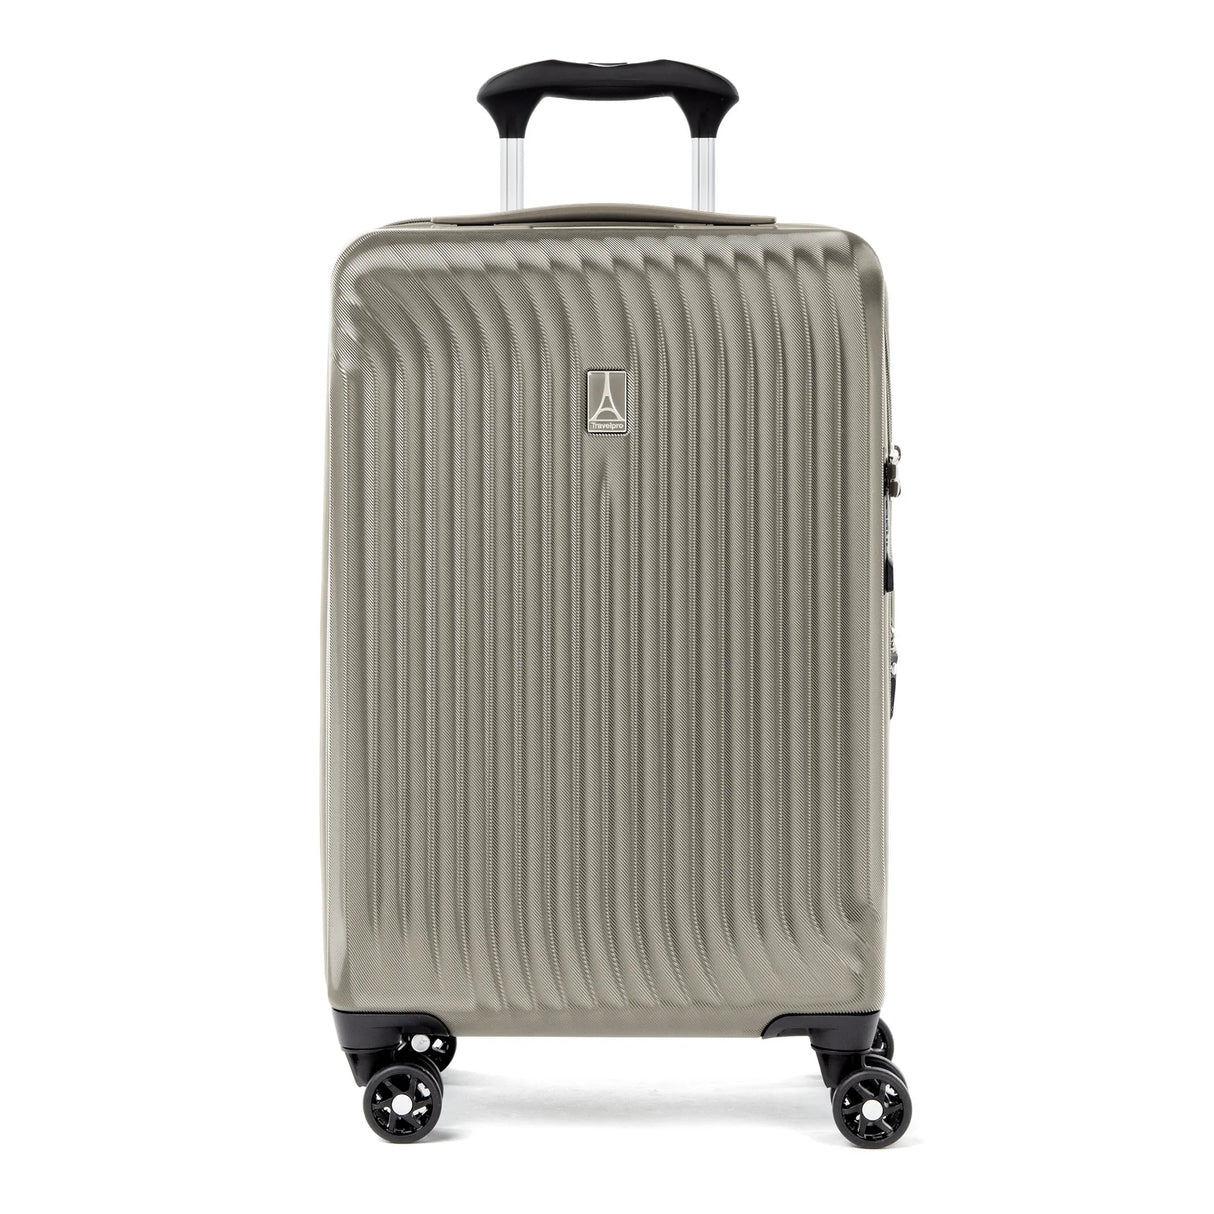 Travelpro Maxlite Air Carry-On Expandable Hardside Spinner , Champagne , 401229135_-1500x1500-d707c29_1024x1024_2x_23925871-ba0b-42dc-b721-a6c179d0f1ee